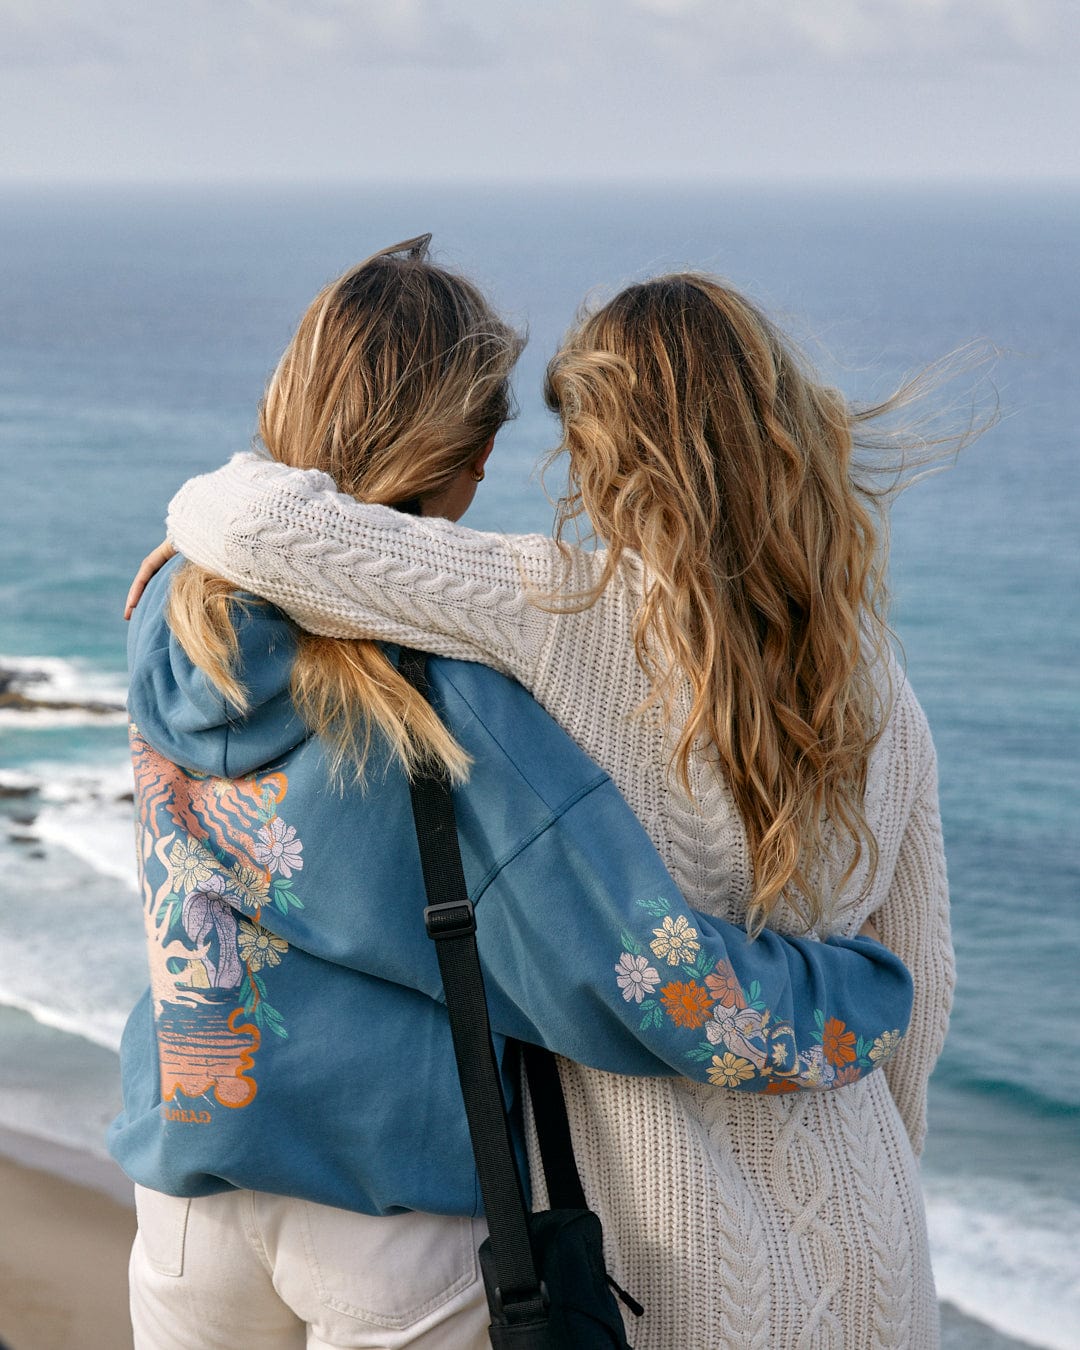 Two women embracing in Saltrock chunky cable knit open front cardigans and looking out at the sea.